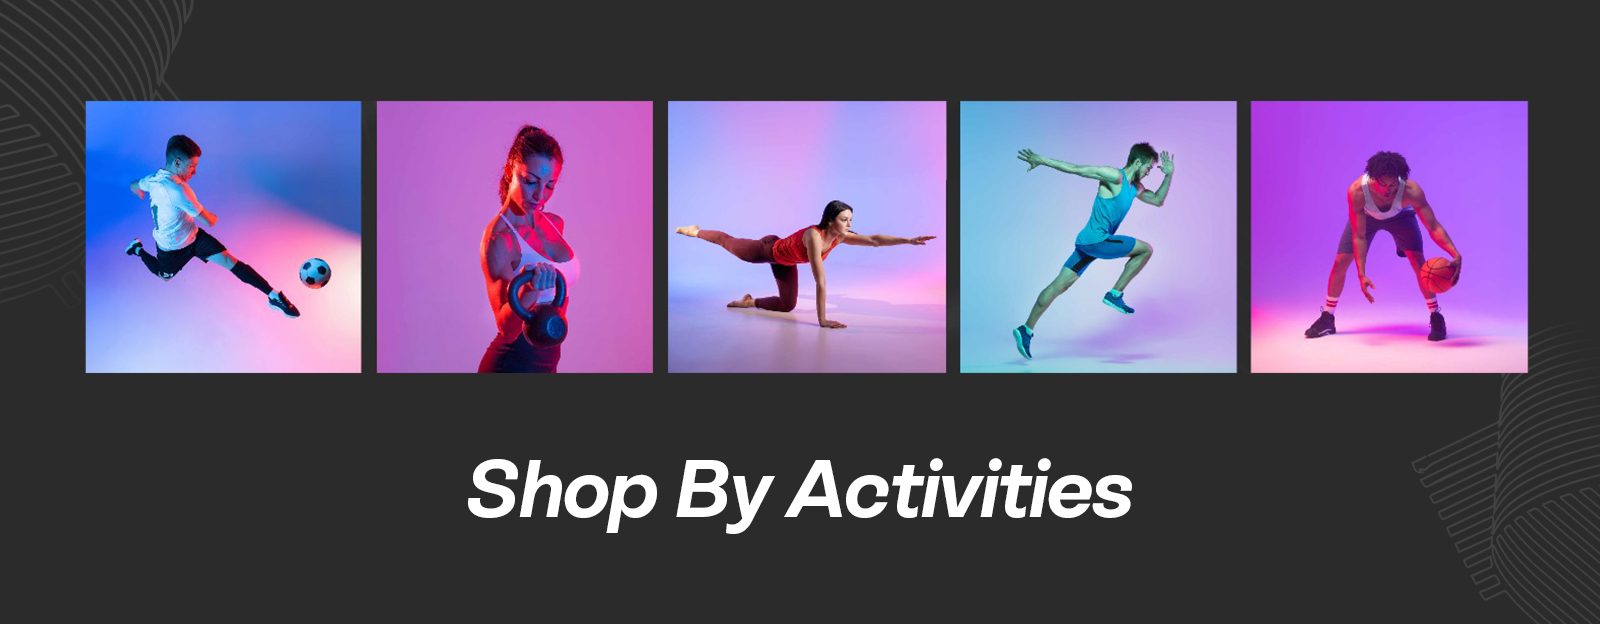 Shop By Activity